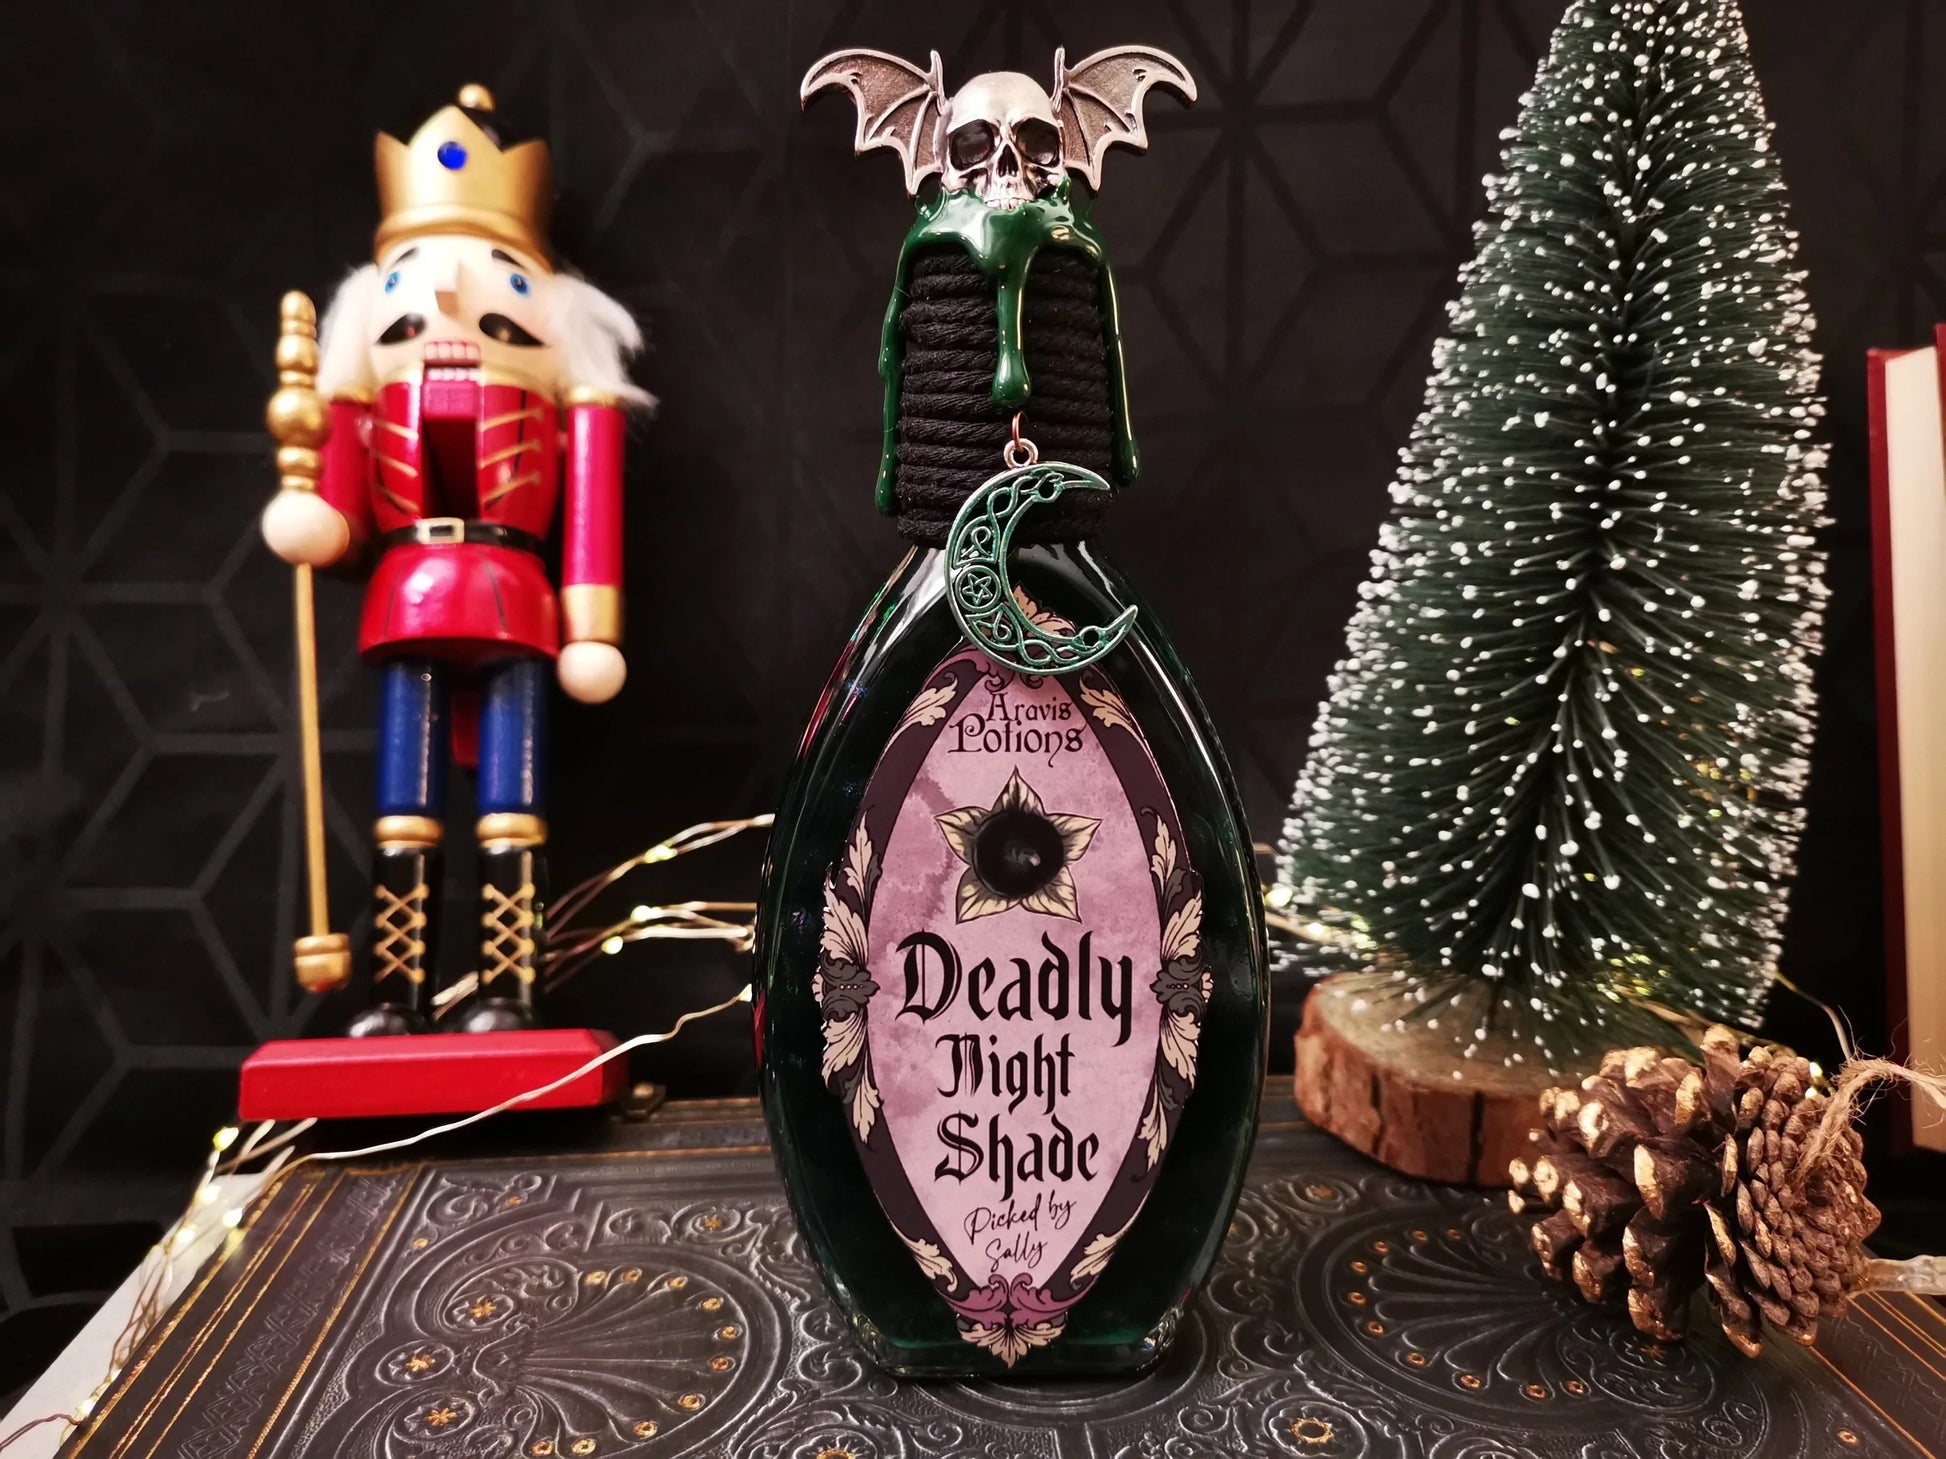 Deadly Night Shade (Nocturnaline/Belladonne) Aravis Potions Apothecary Harry Potter